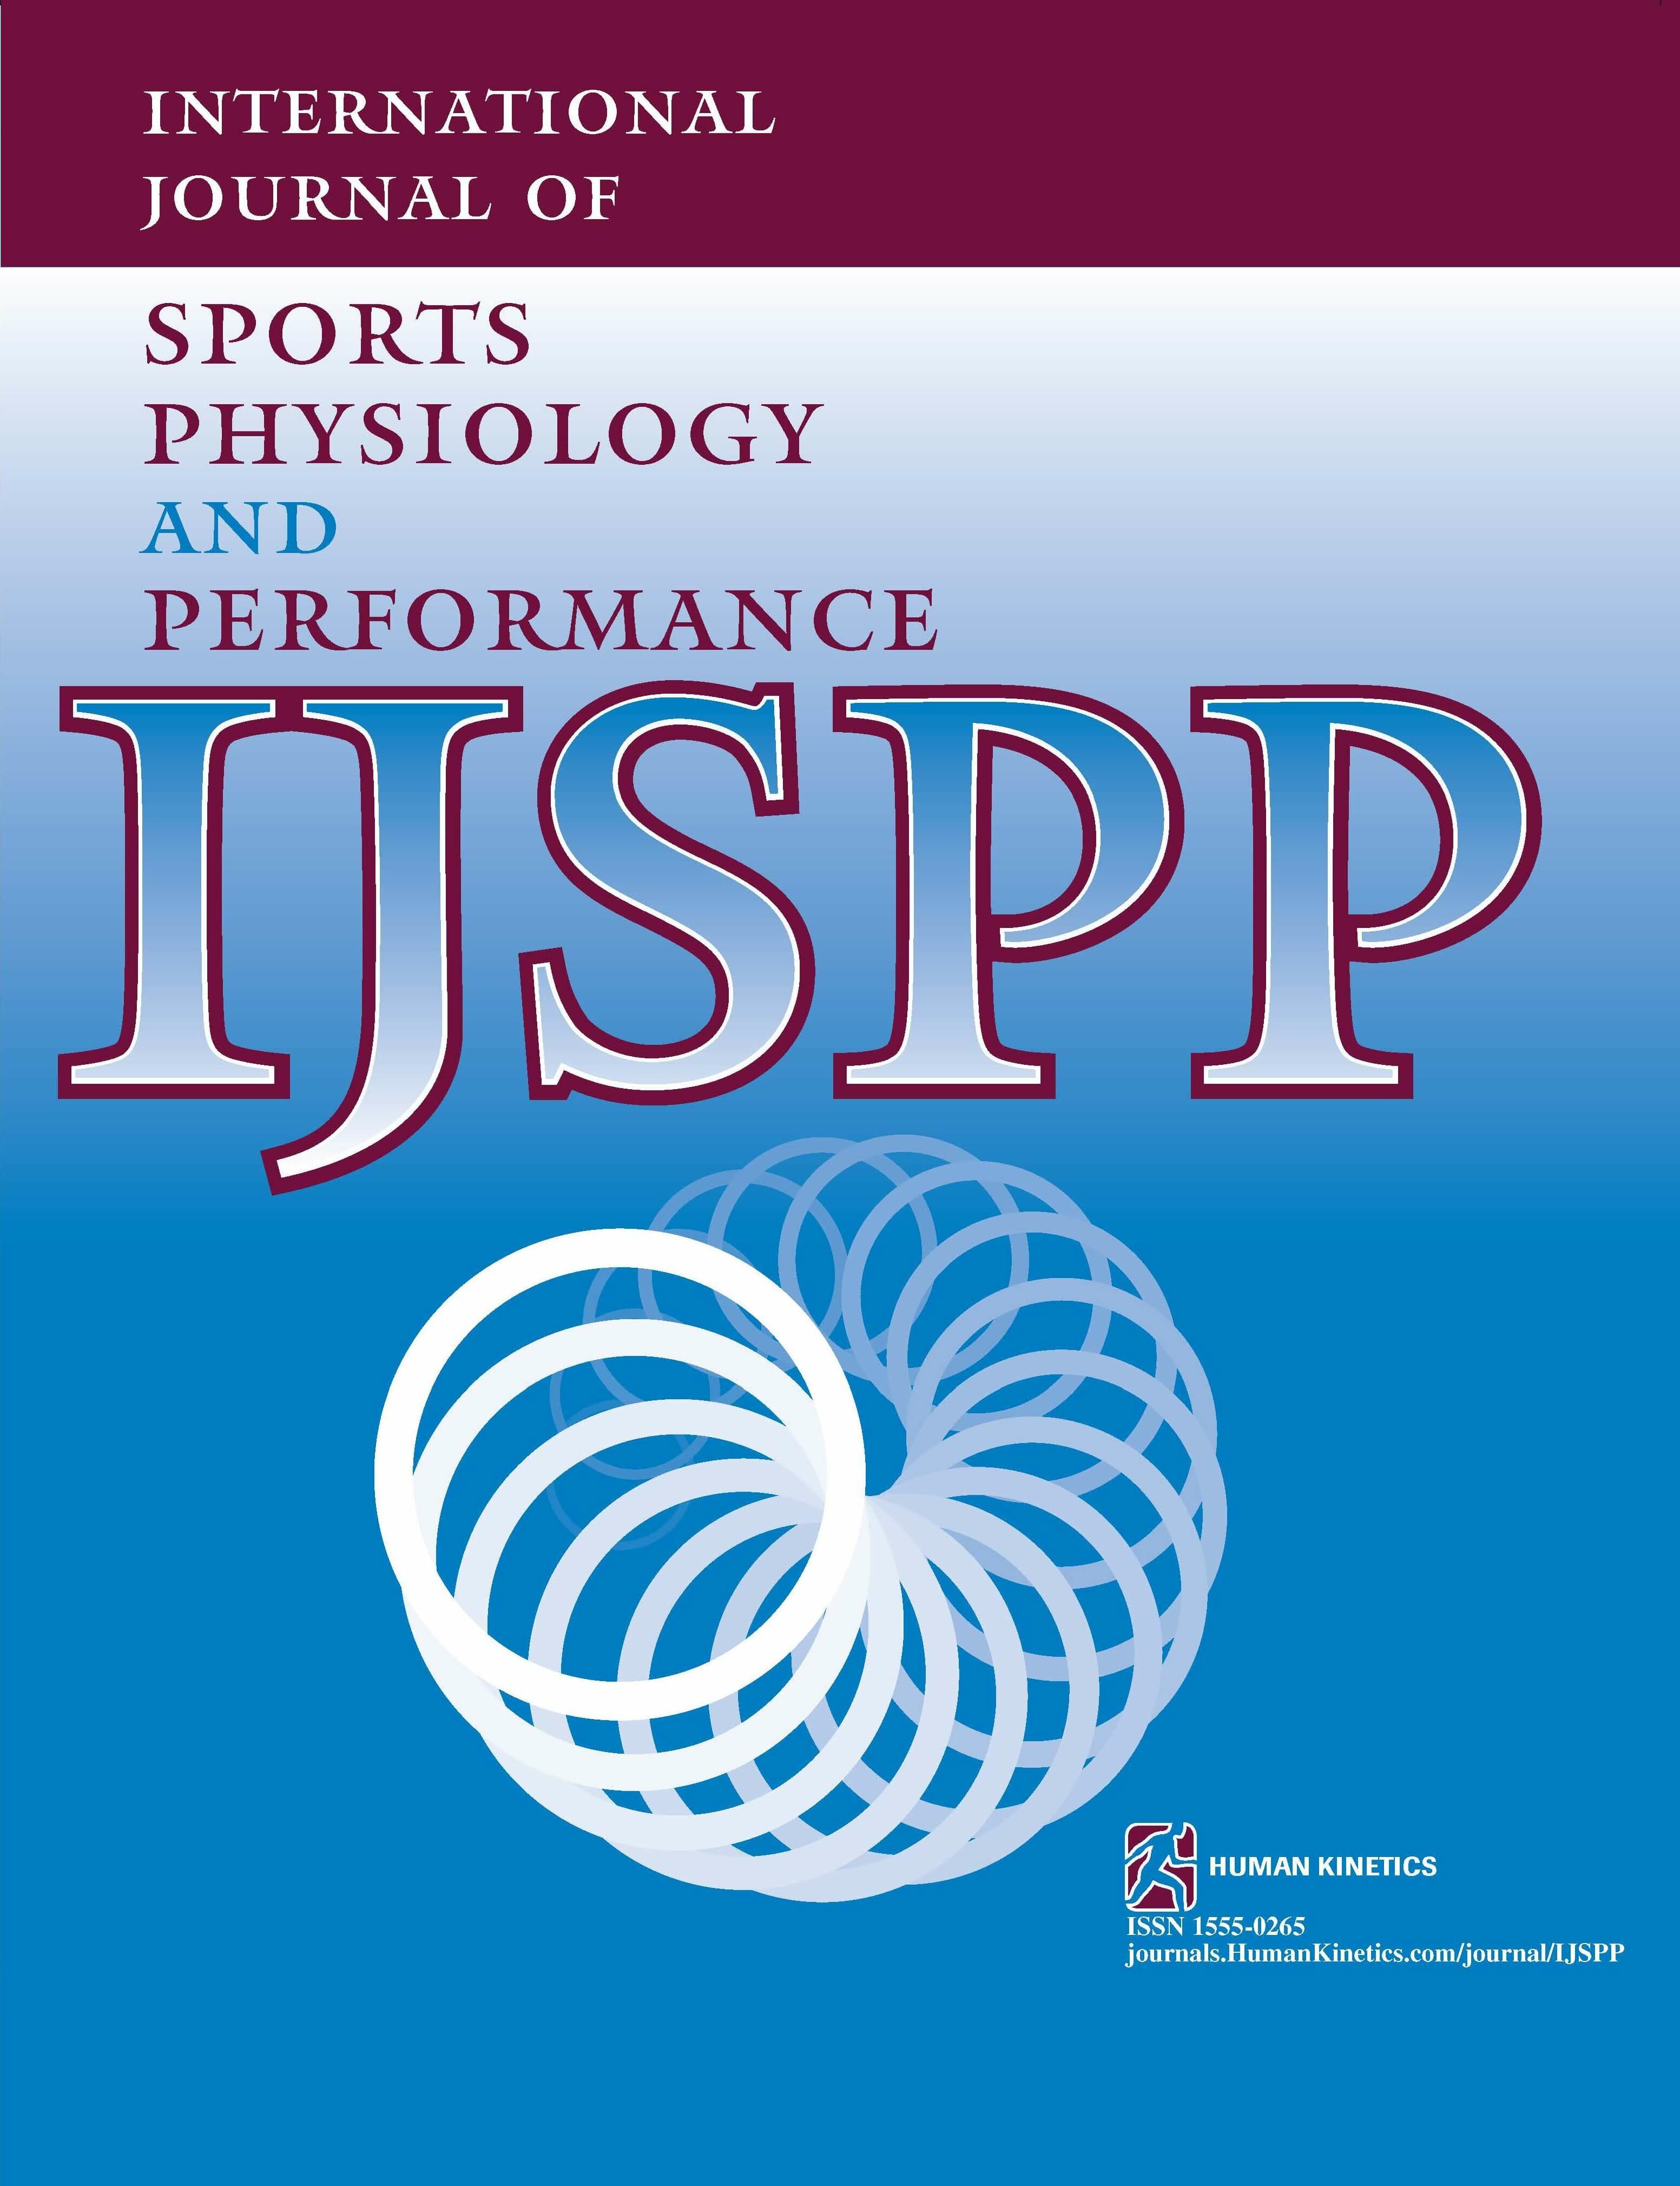 ChatGPT for Sample-Size Calculation in Sports Medicine and Exercise Sciences: A Cautionary Note